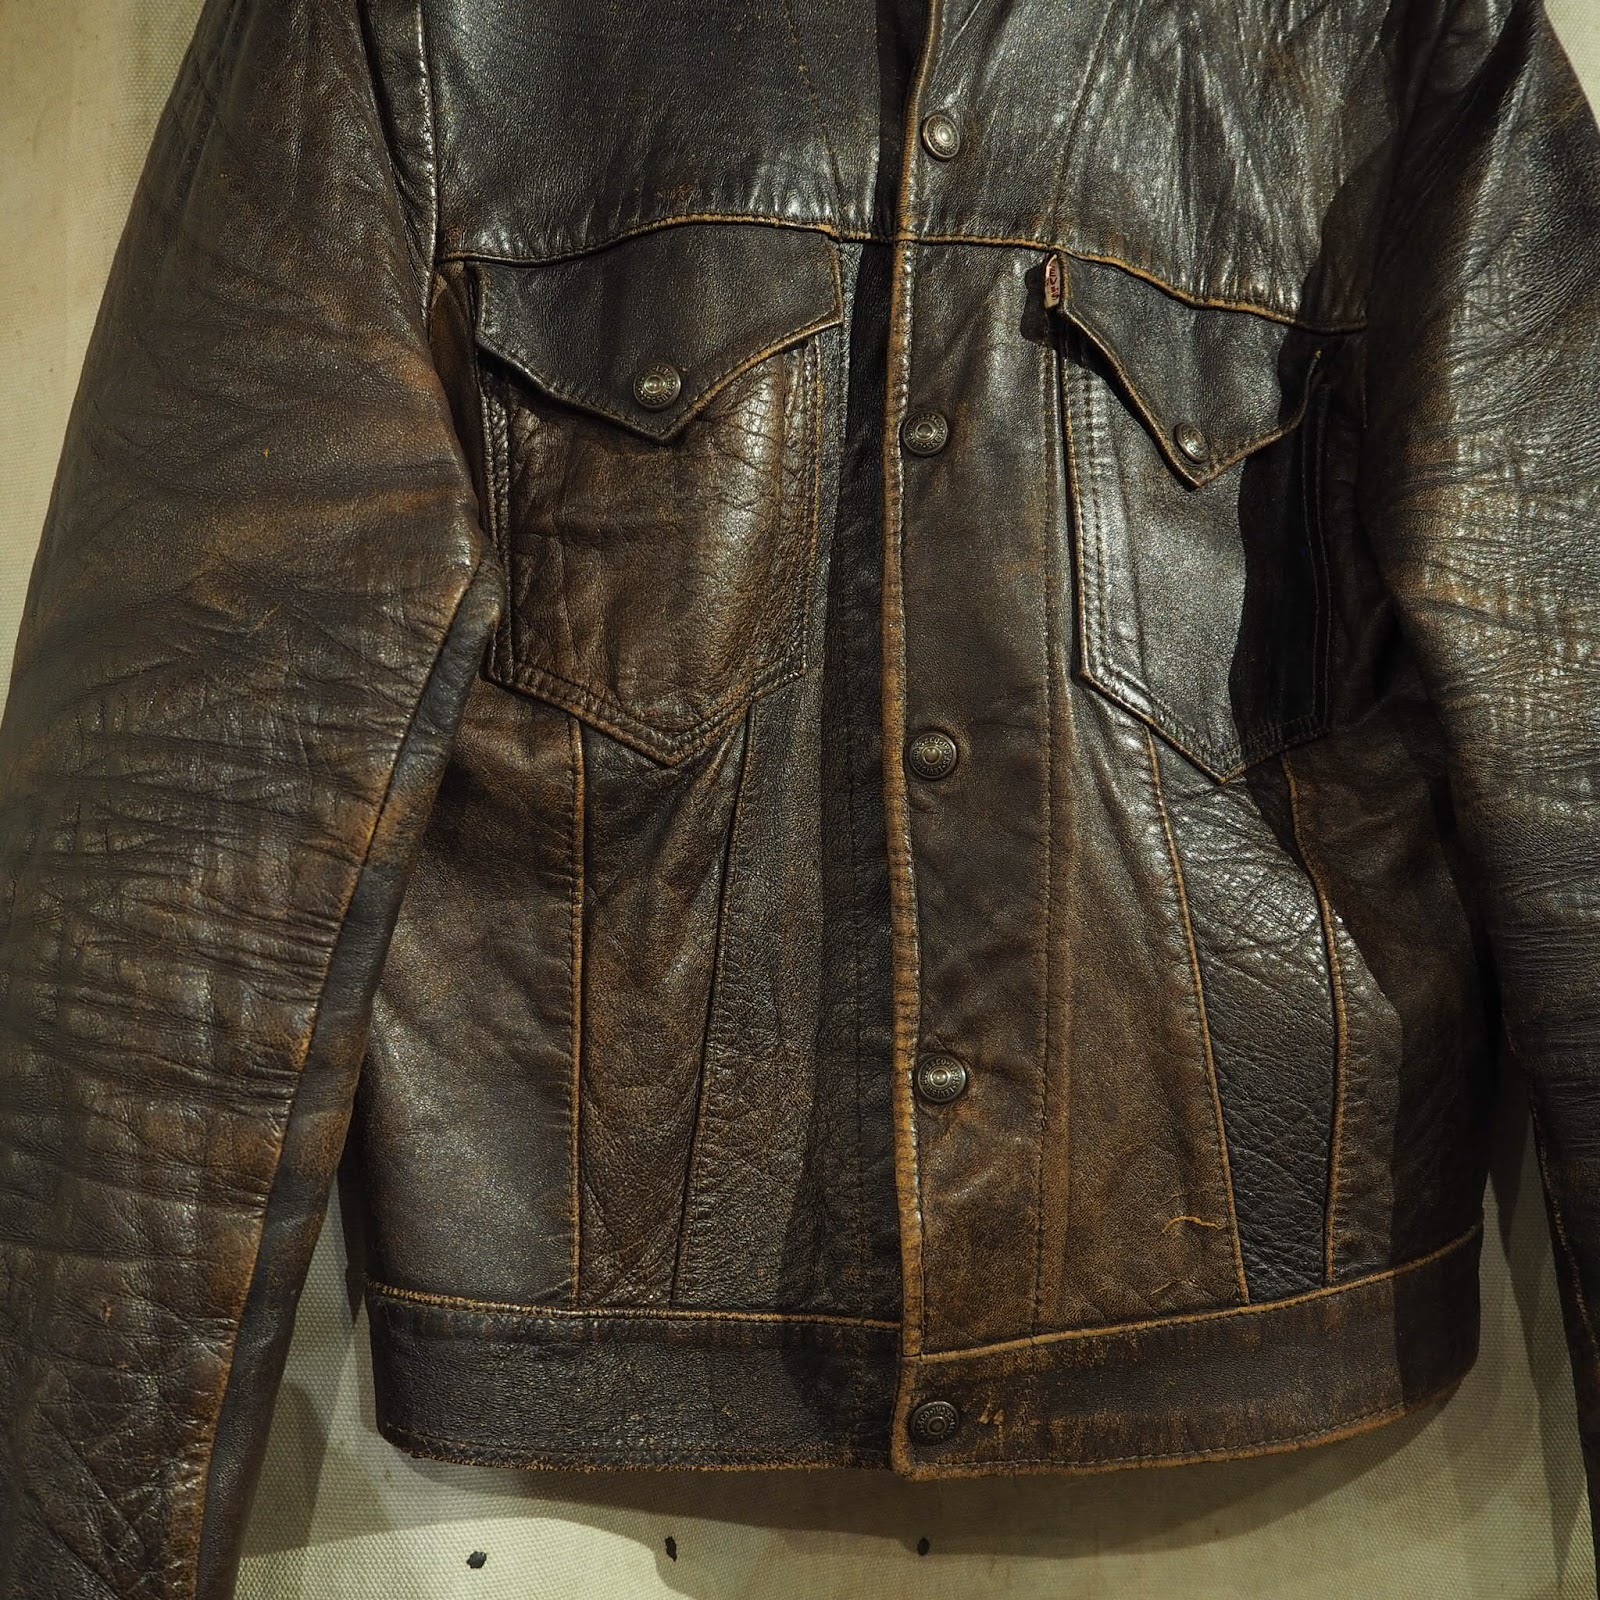 Leather Trucker Levi's / Lee / Type-whatever jackets! | Page 8 | The ...